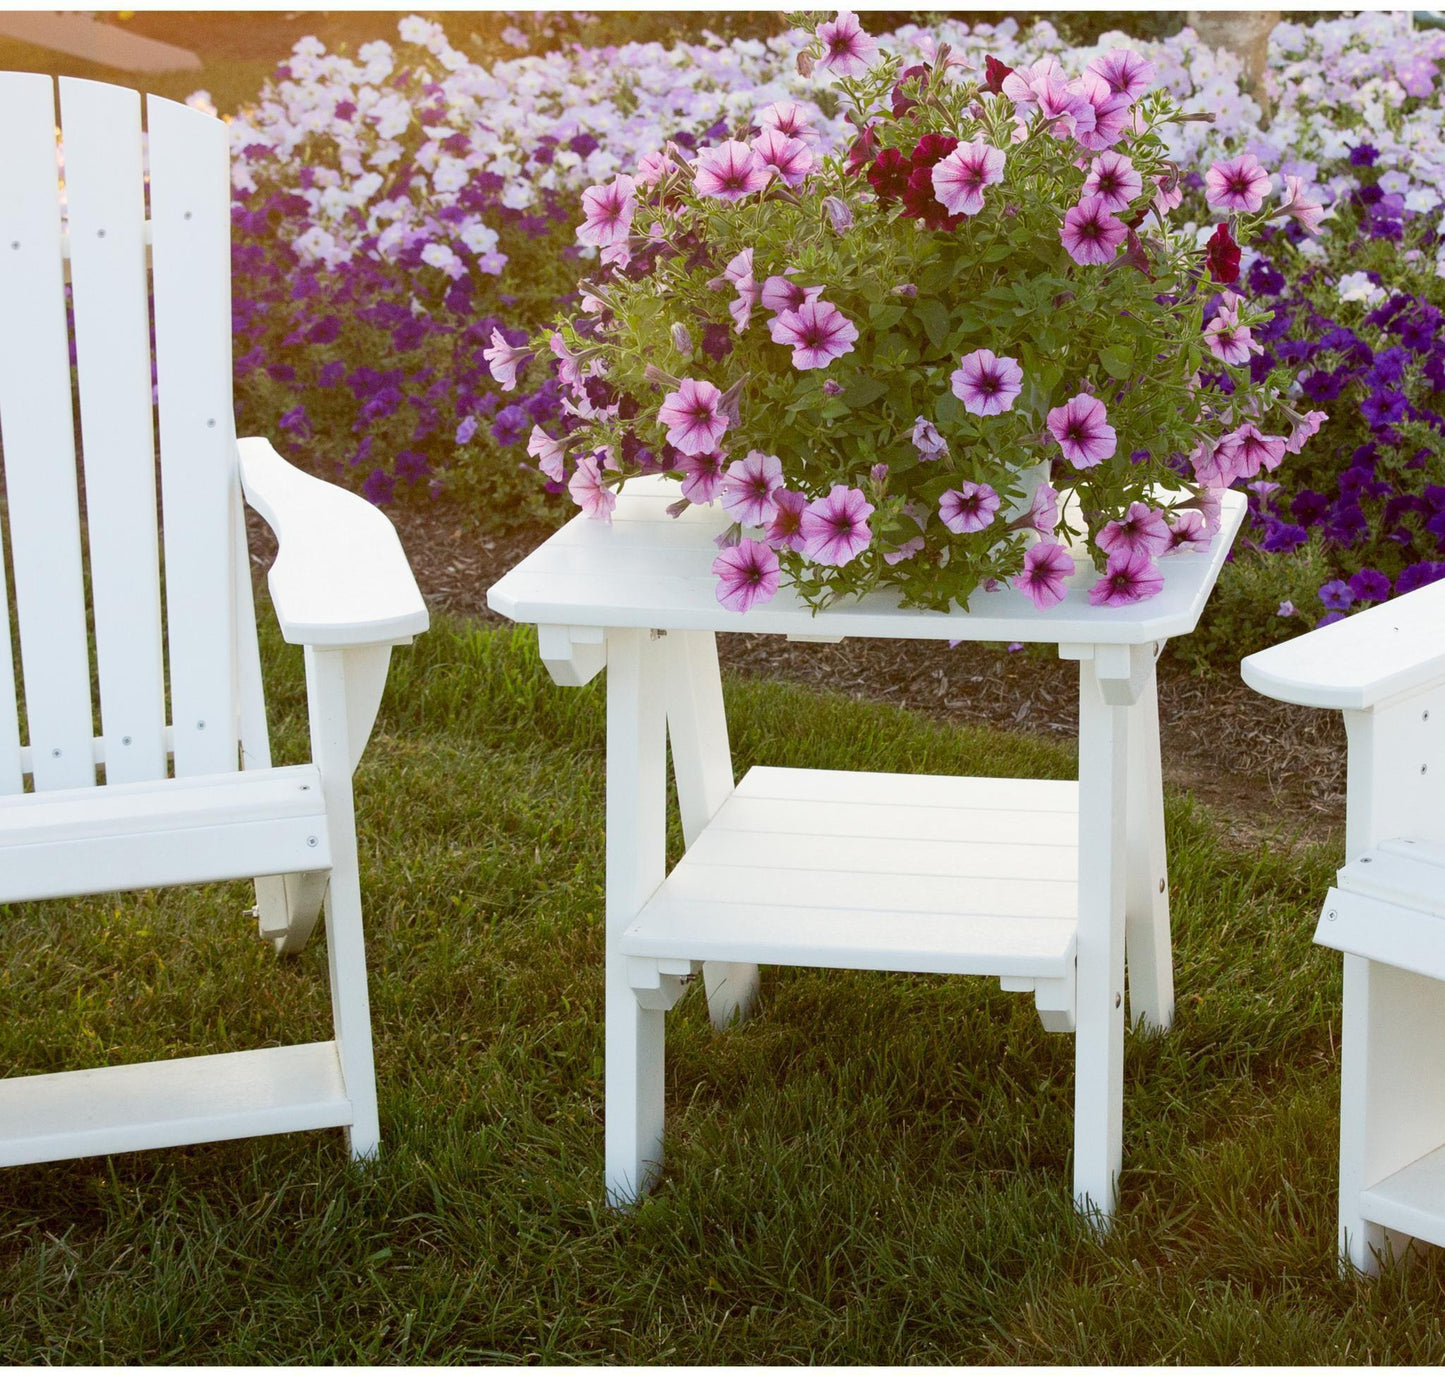 Wildridge LCC-112 Recycled Plastic Heritage Upright Adirondack Chair 3 Piece Set - LEAD TIME TO SHIP 6 WEEKS OR LESS